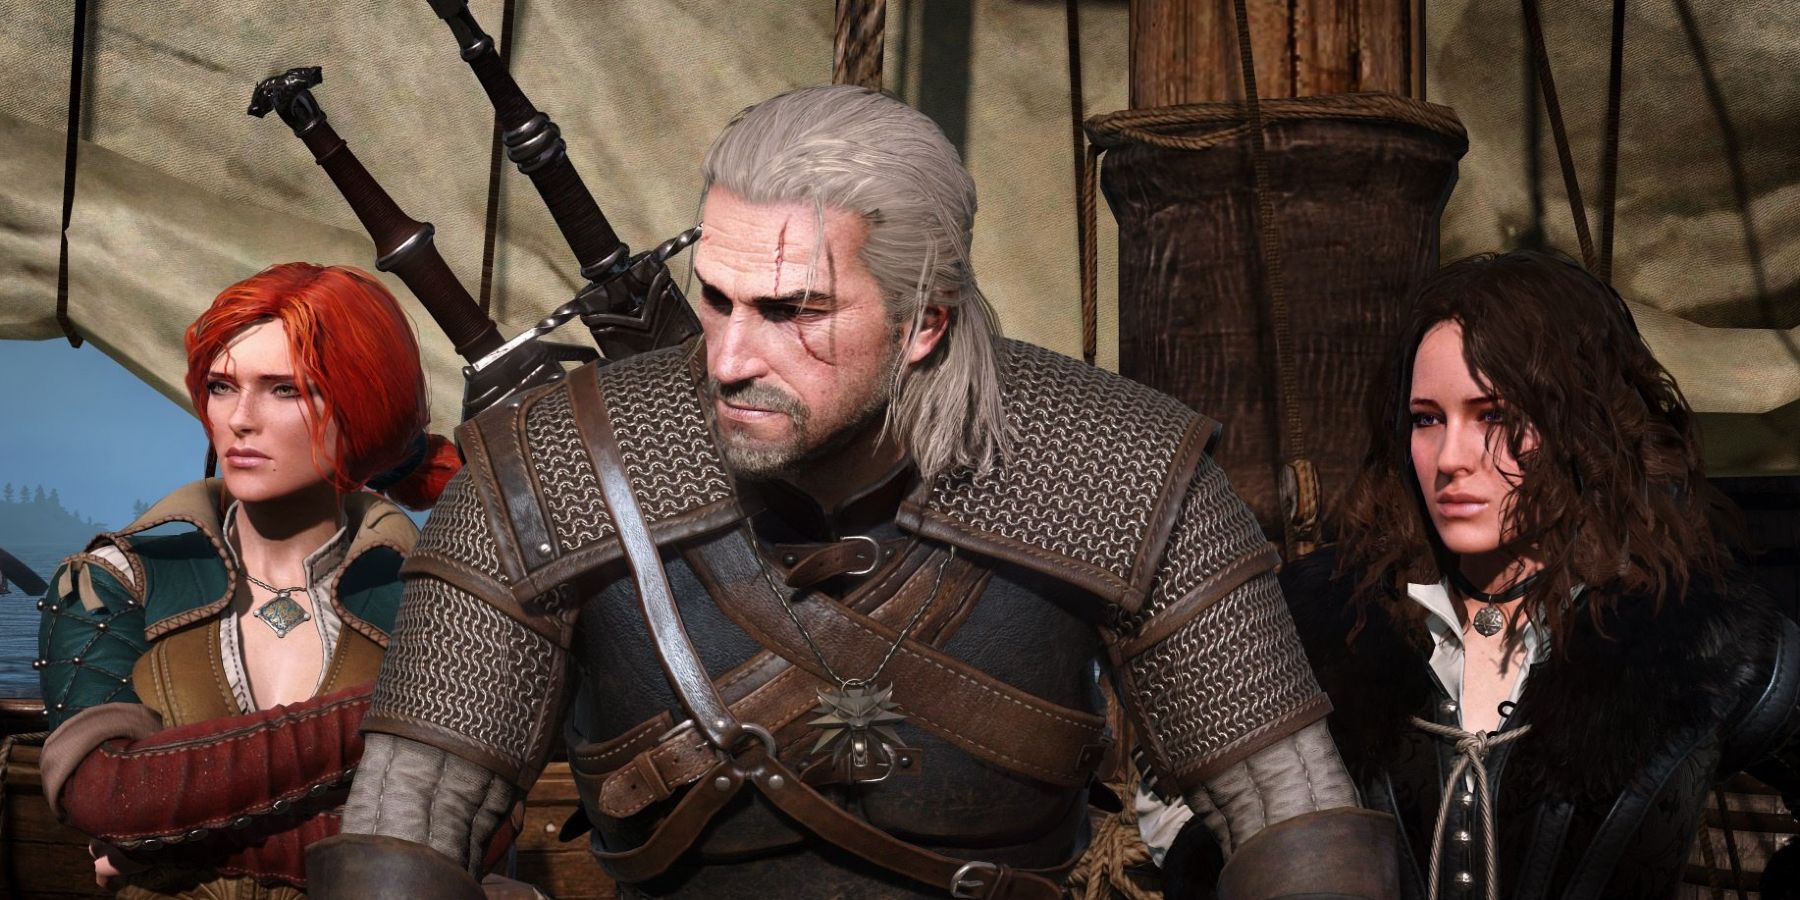 The Witcher Risks Repeating The Daenerys Mistake That Killed Game of Thrones